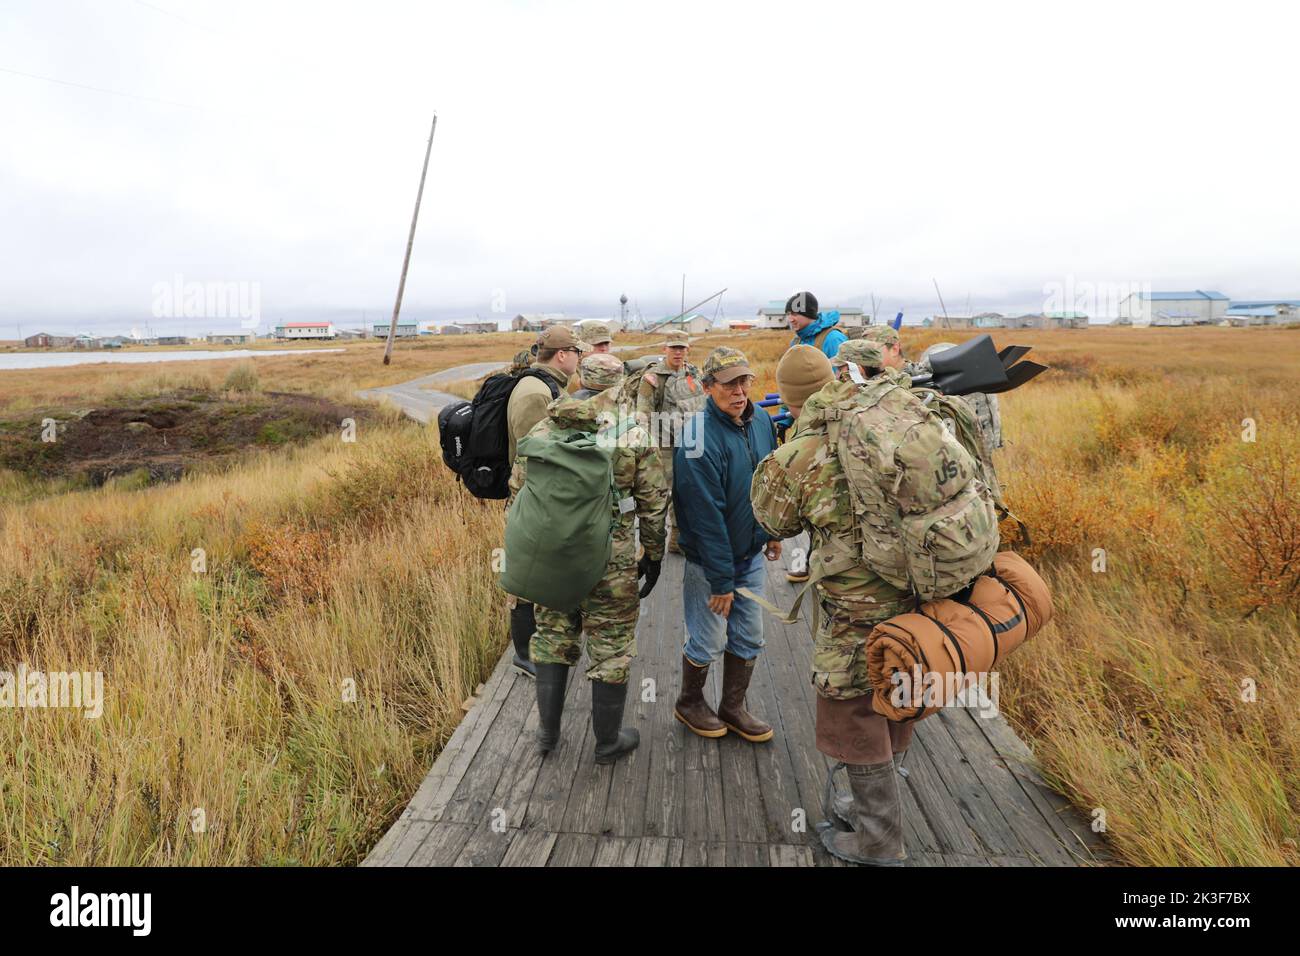 U.S. soldiers with the Alaska National Guard make their way to a tiny coastal village after landing to assist local residents with clean up in the aftermath of Typhoon Merbok, September 22, 2022 in Newtok, Alaska. The remote Native Alaskan villages suffered flooding across more than 1,000 miles of Alaskan coastline. Stock Photo